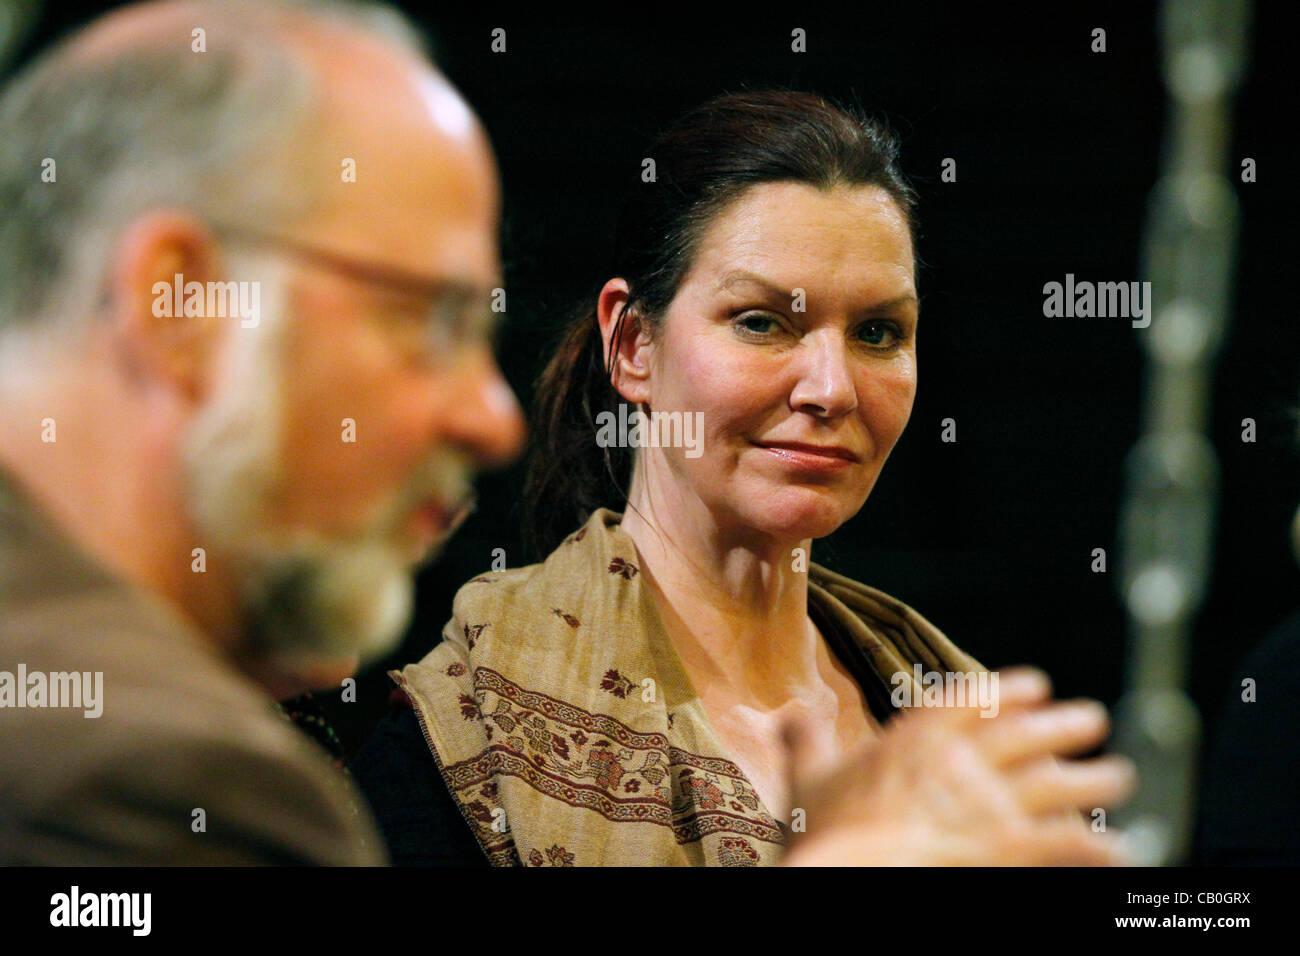 US soprano Janice Baird and conductor Caspar Richter pictured during the press conference in Brno, Czech Republic, on Monday, May 14, 2012. Janice Baird will sing role Elektra in Richard Strausse opera in National Theatre Brno. (CTK Photo/Vaclav Salek) Stock Photo